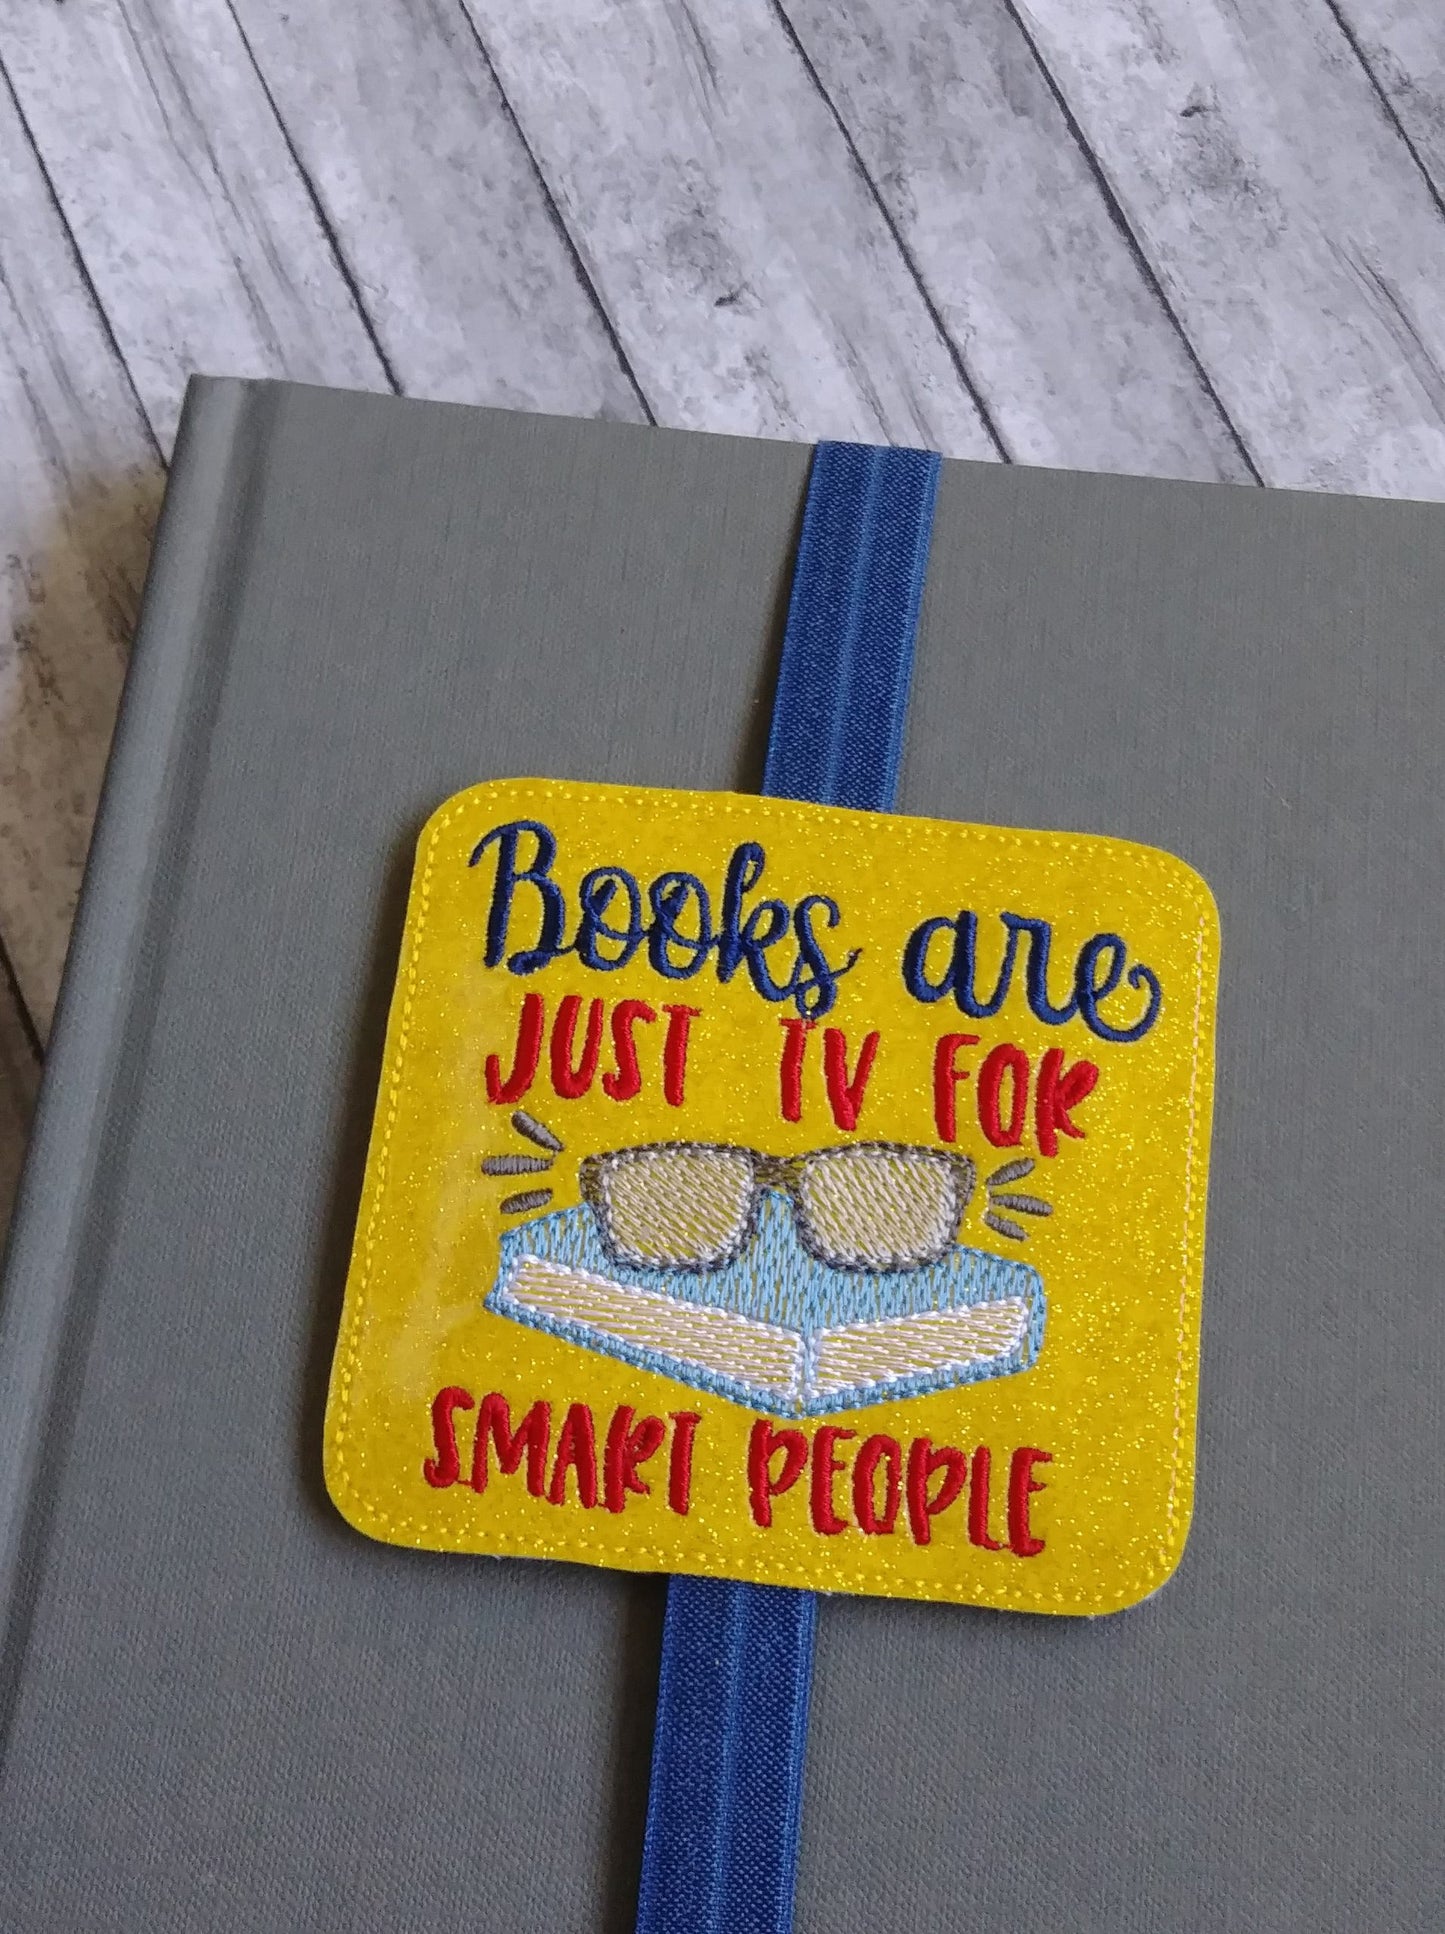 Tv for smart people Book Band - Embroidery Design, Digital File